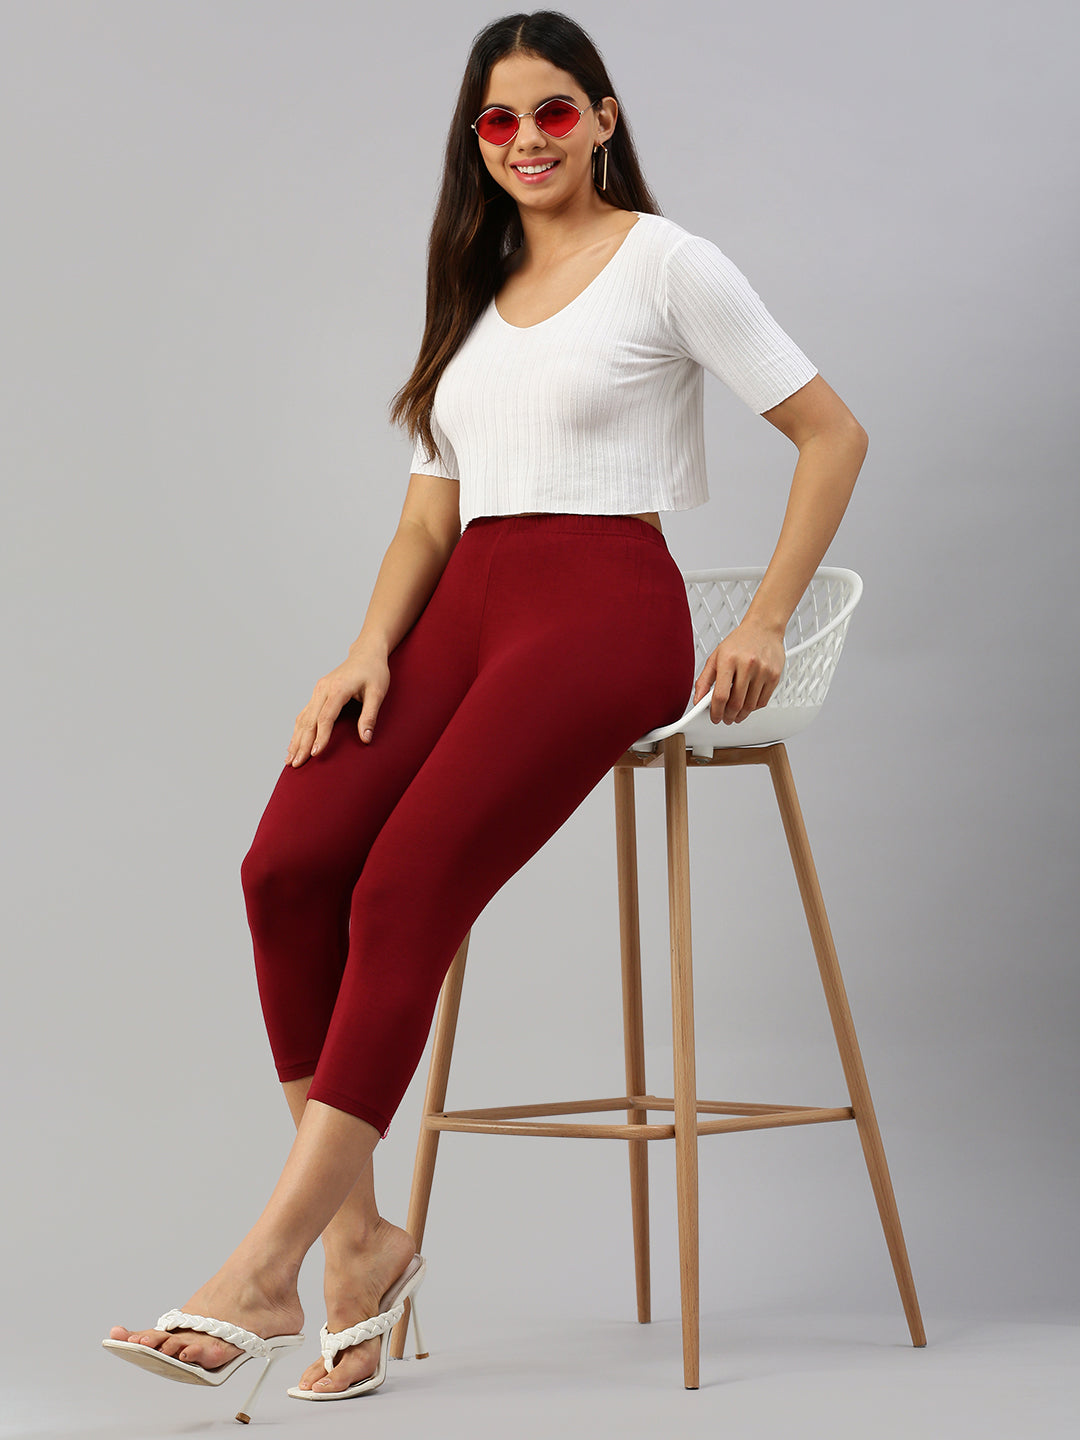 Cotton Leggings Combo in Kohima - Dealers, Manufacturers & Suppliers -  Justdial